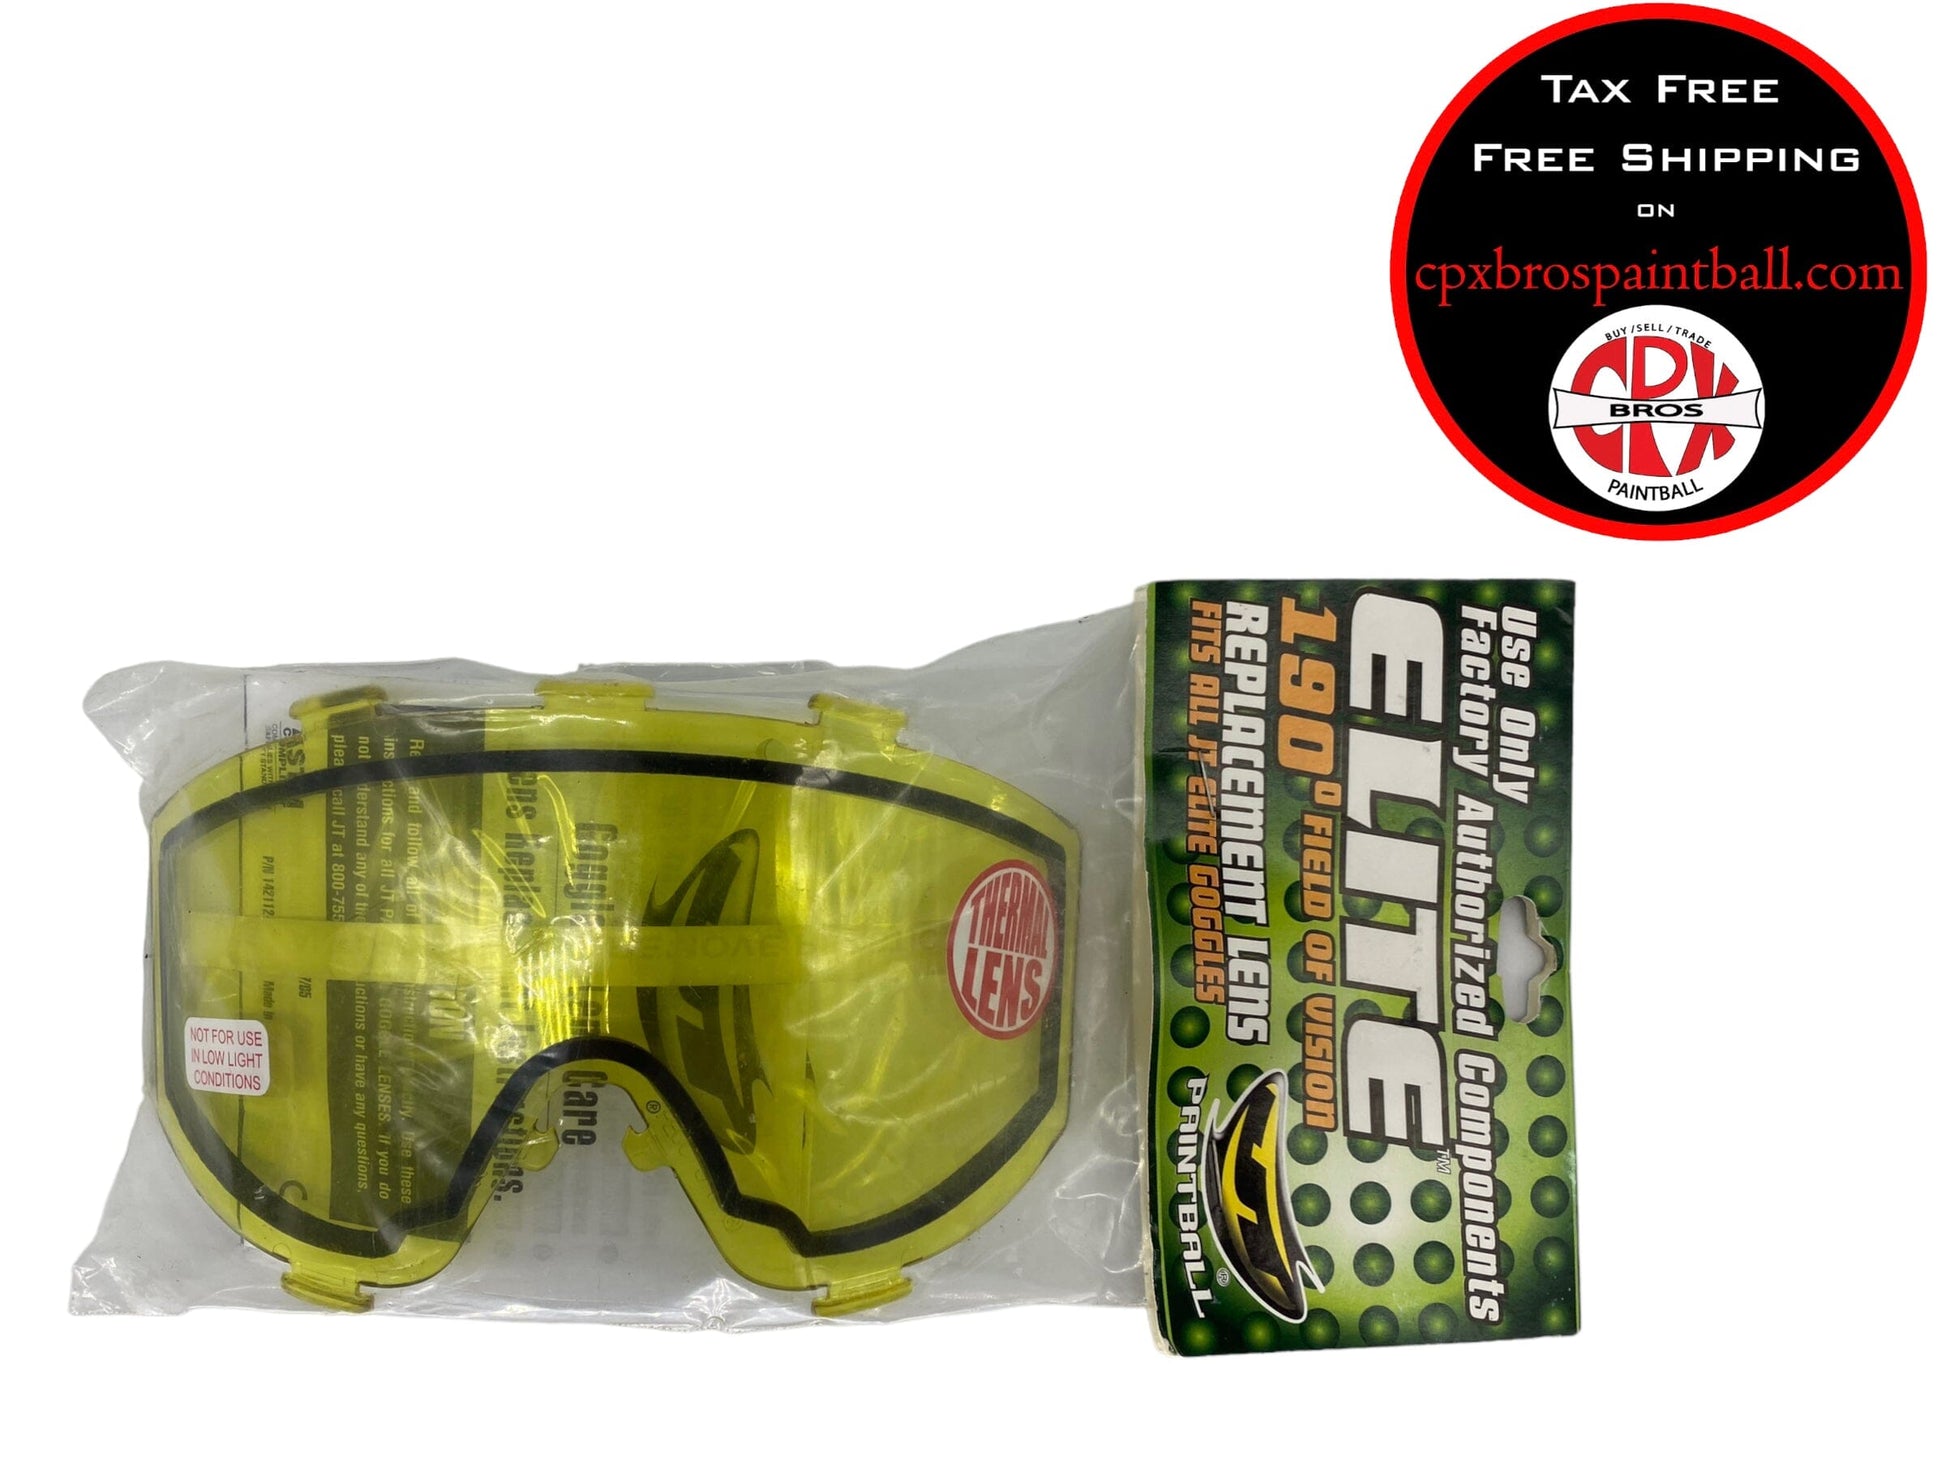 Used JT Spectra Proflex Replacement Thermal Lens For Paintball Mask Goggles Paintball Gun from CPXBrosPaintball Buy/Sell/Trade Paintball Markers, Paintball Hoppers, Paintball Masks, and Hormesis Headbands